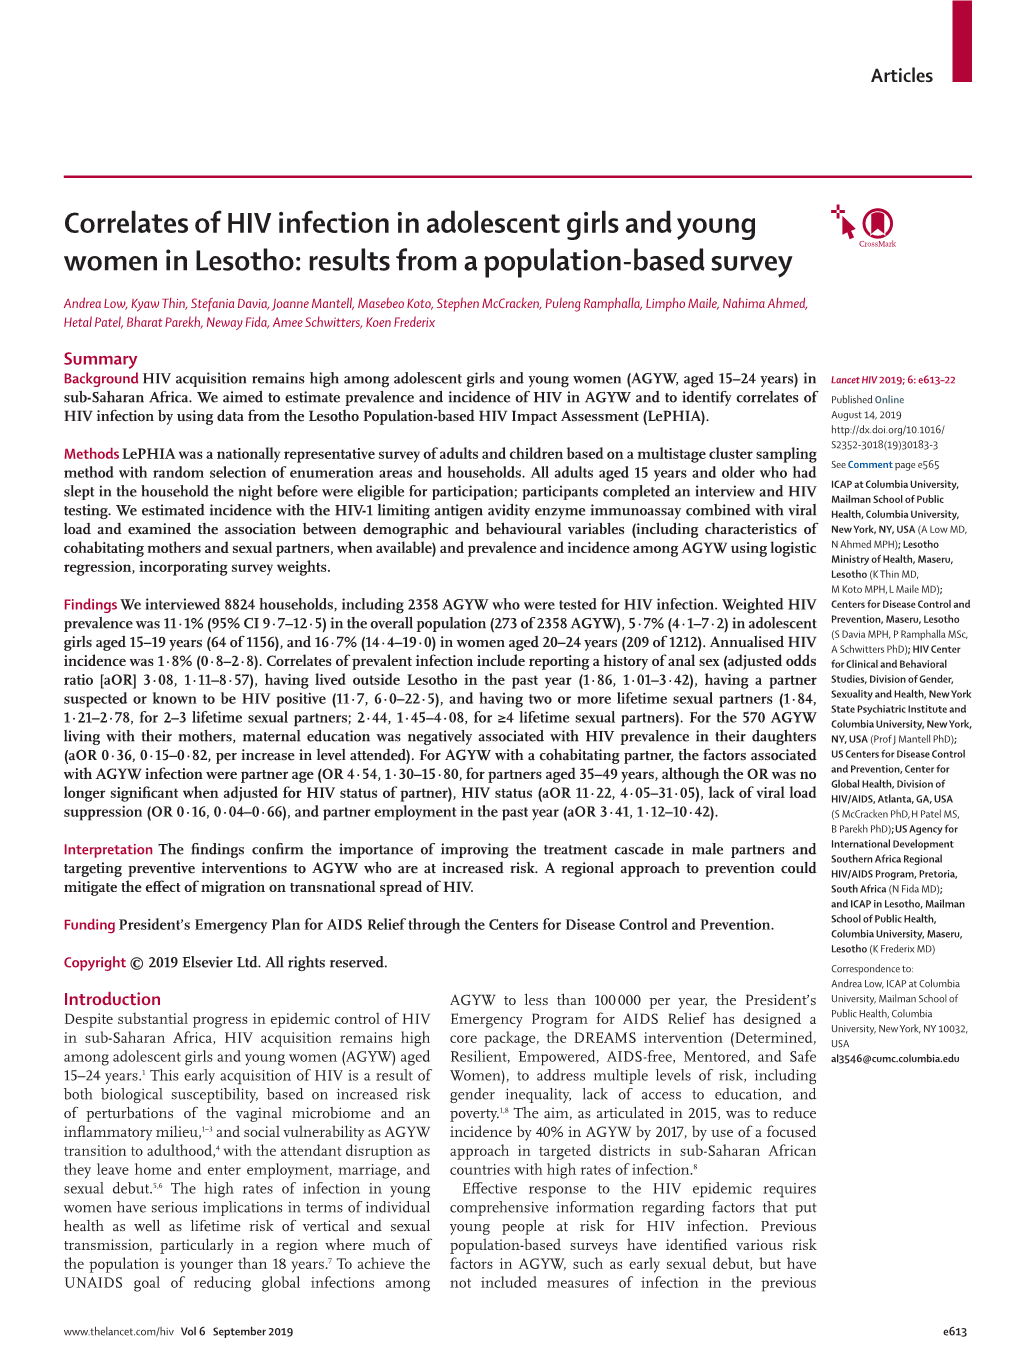 Correlates of HIV Infection in Adolescent Girls and Young Women in Lesotho: Results from a Population-Based Survey